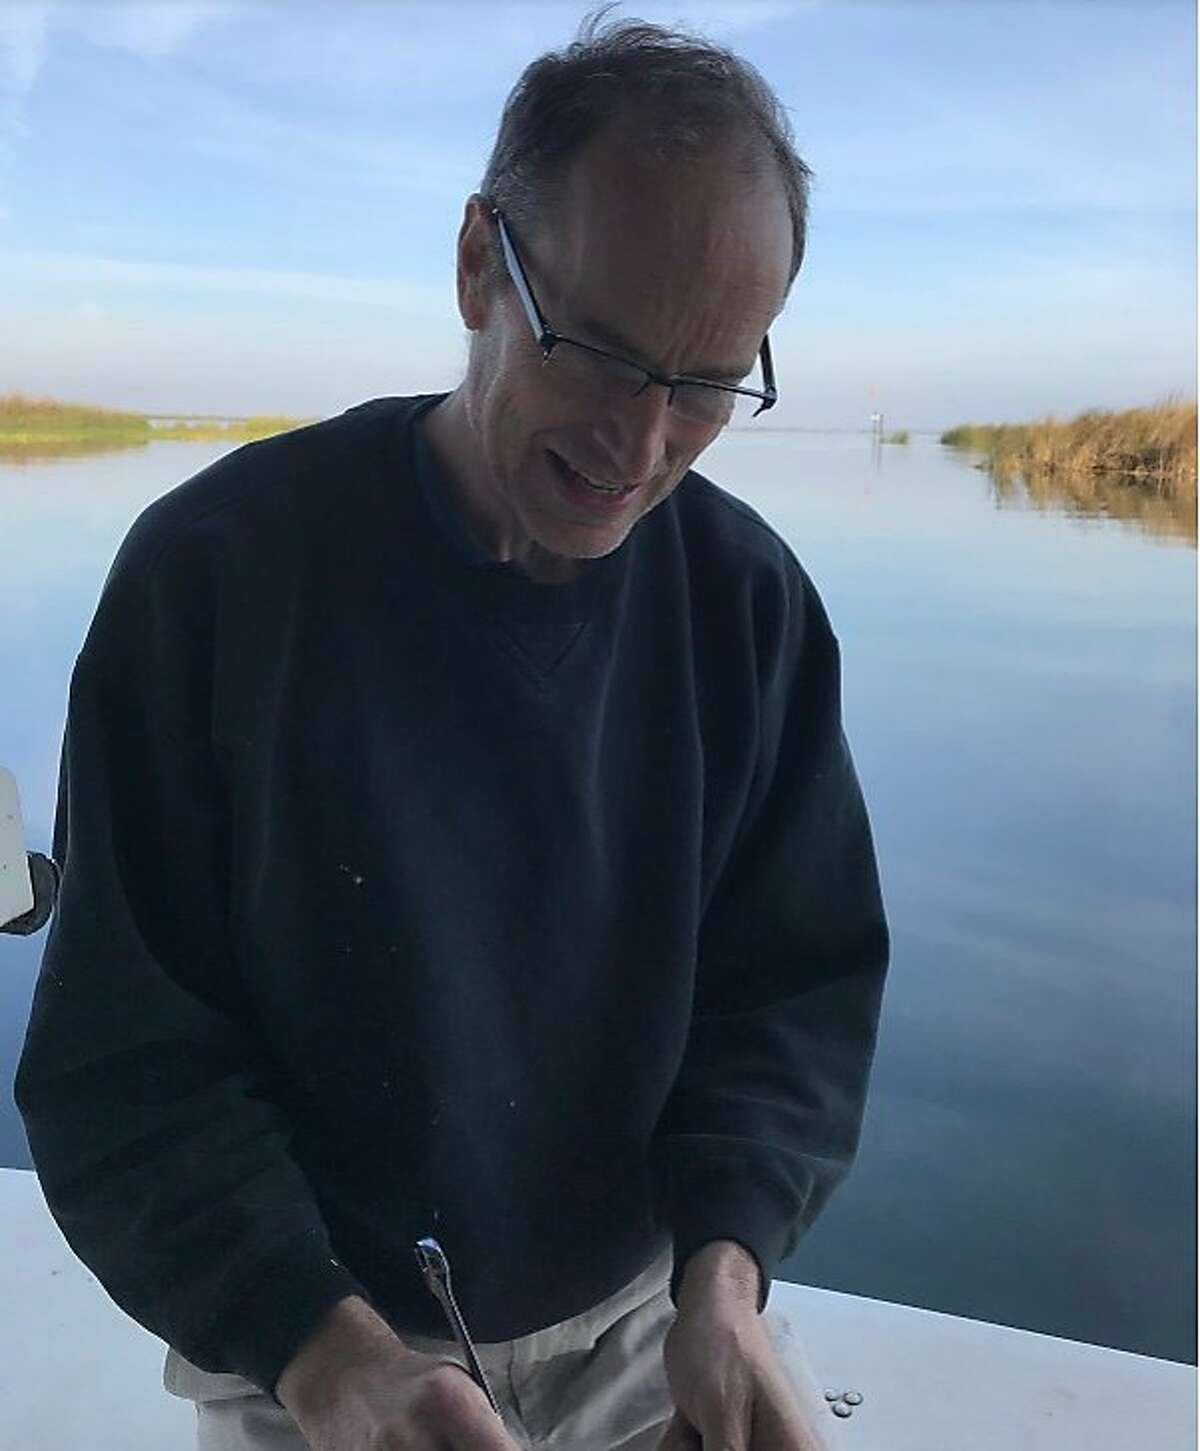 Rio Mobility CEO Bart Kylstra, 52, was killed Wednesday night. Kylstra was remembered by family and friends as a thoughtful engineer and avid boater who doted on his extended family.